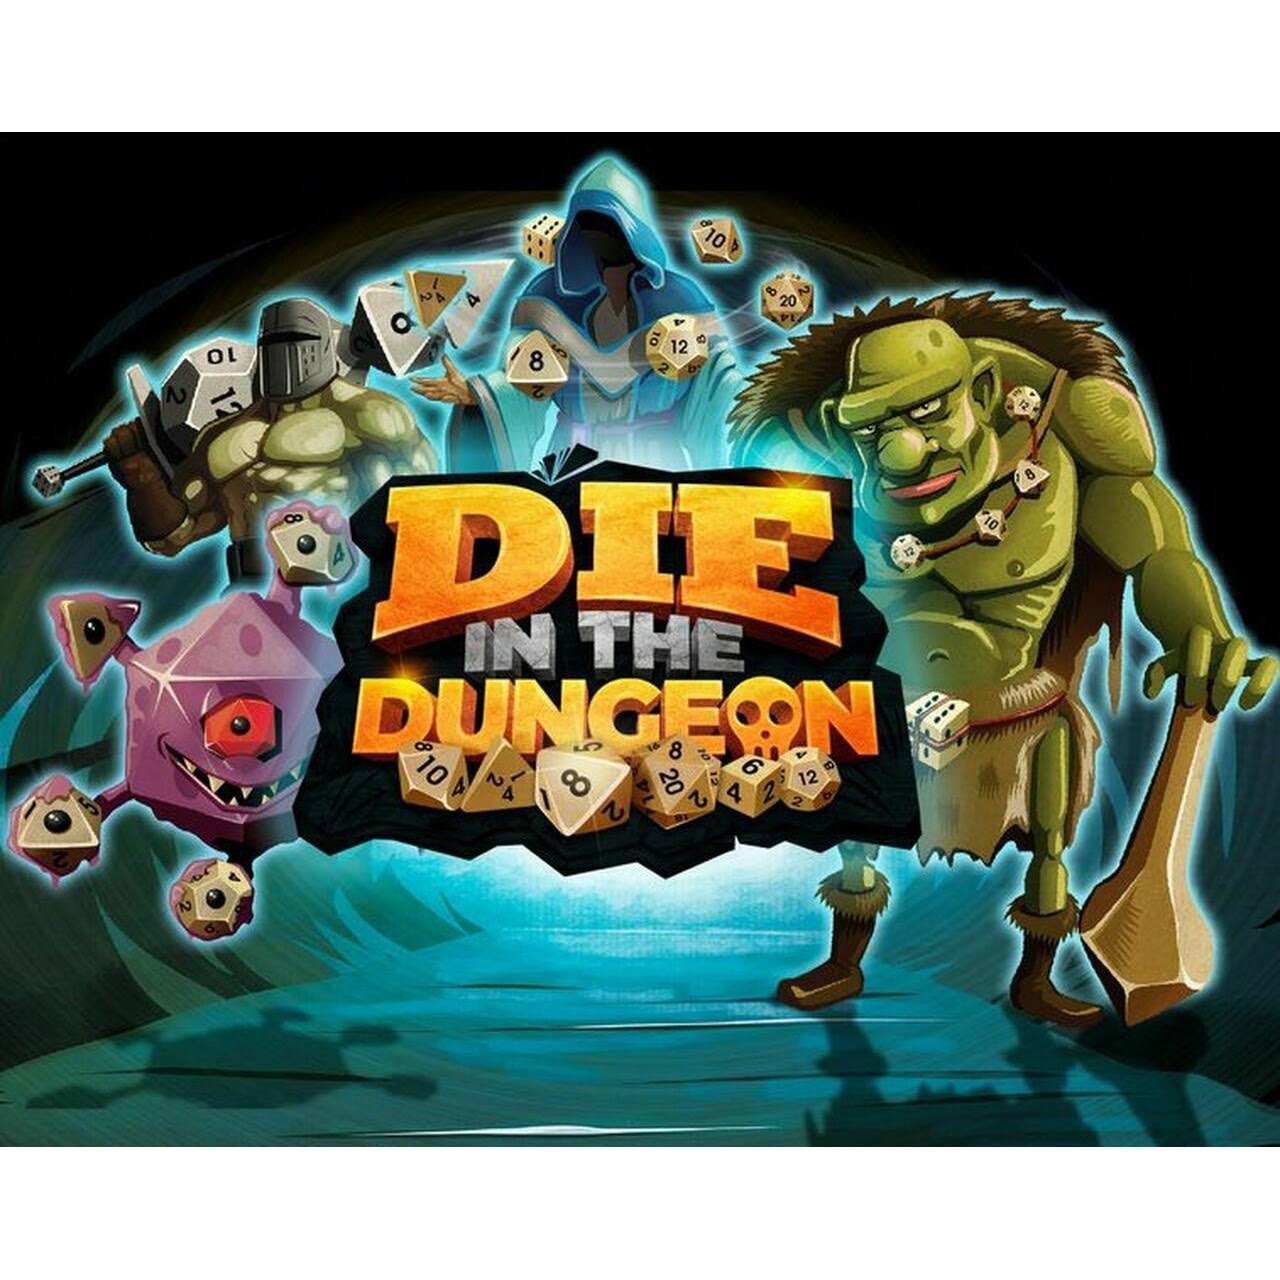 DIE! In The Dungeon